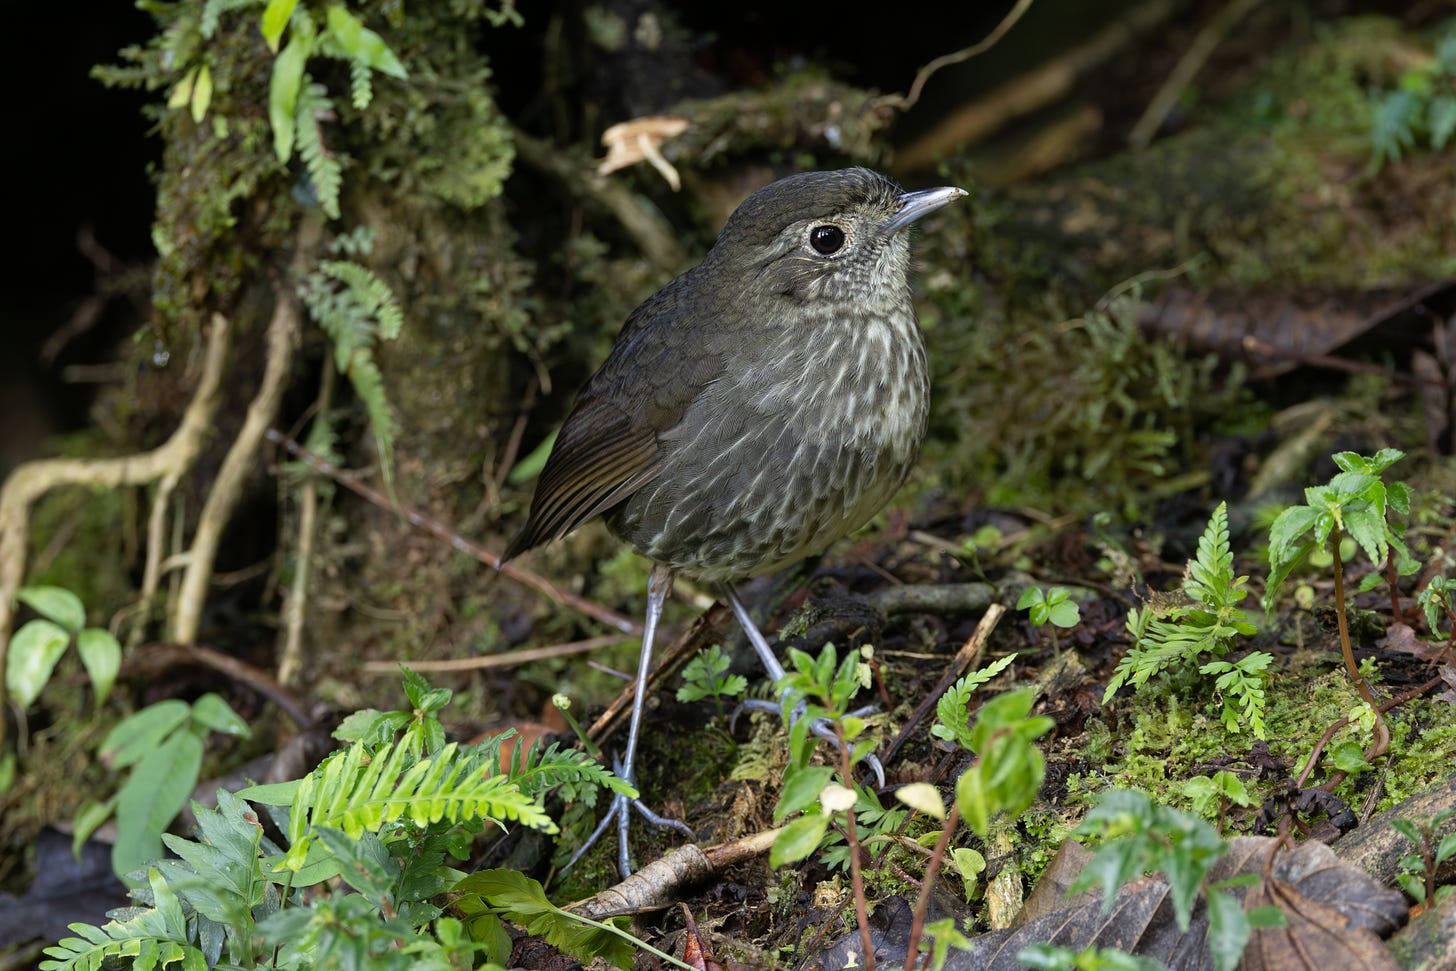 a round bird wiith long stick legs, gray with white streaks on its belly, looking to the right, standing on the ground